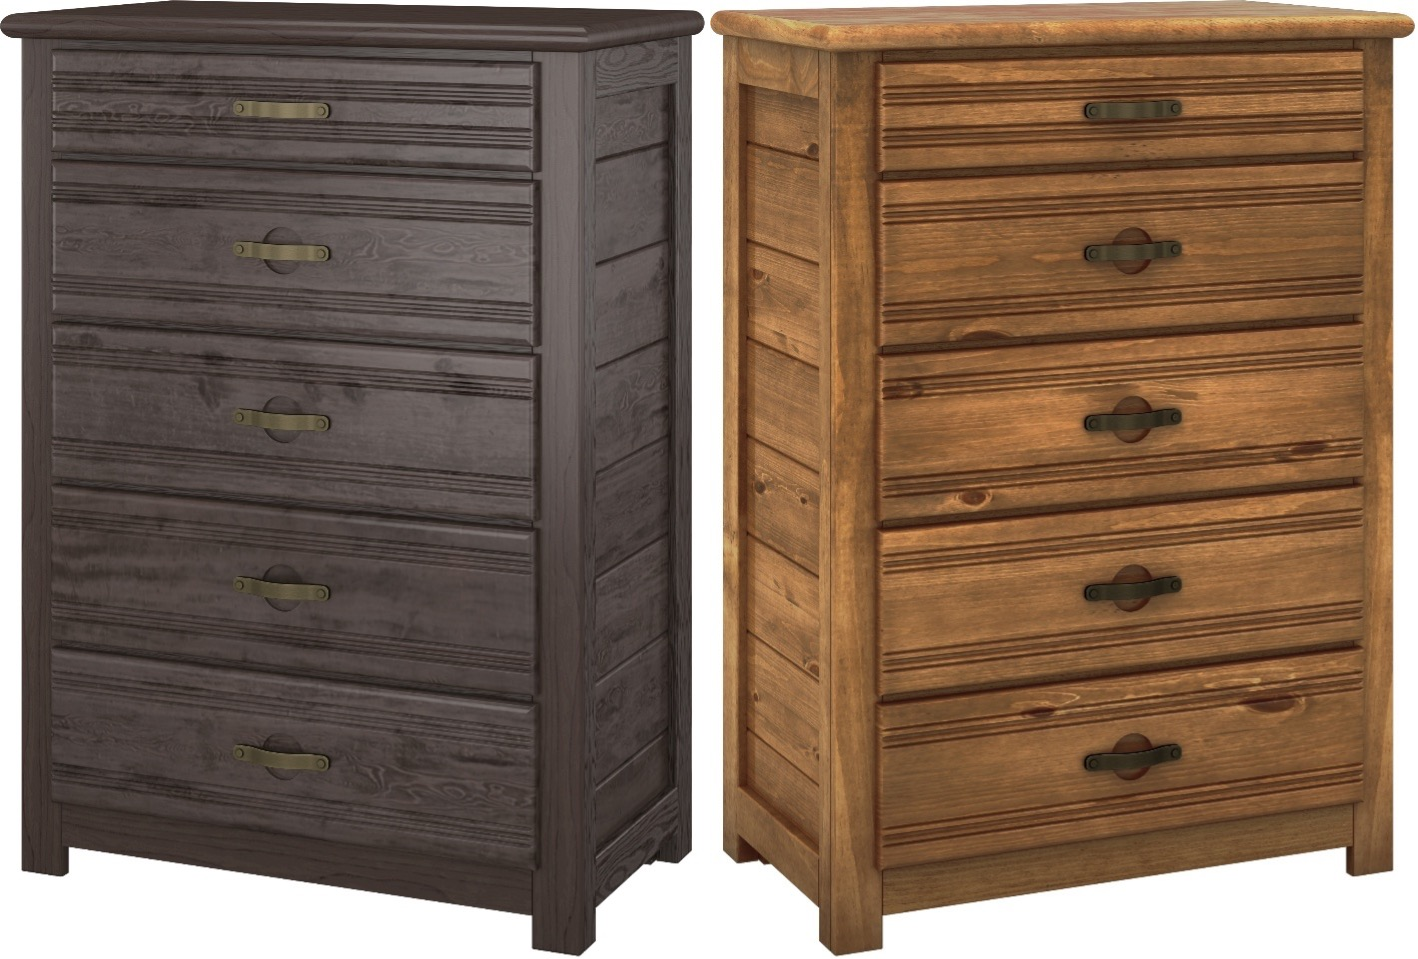 Canyon Furniture Recalled Creekside Kids’ Five-Drawer Chest in Charcoal_Chestnut sold at Rooms To Go